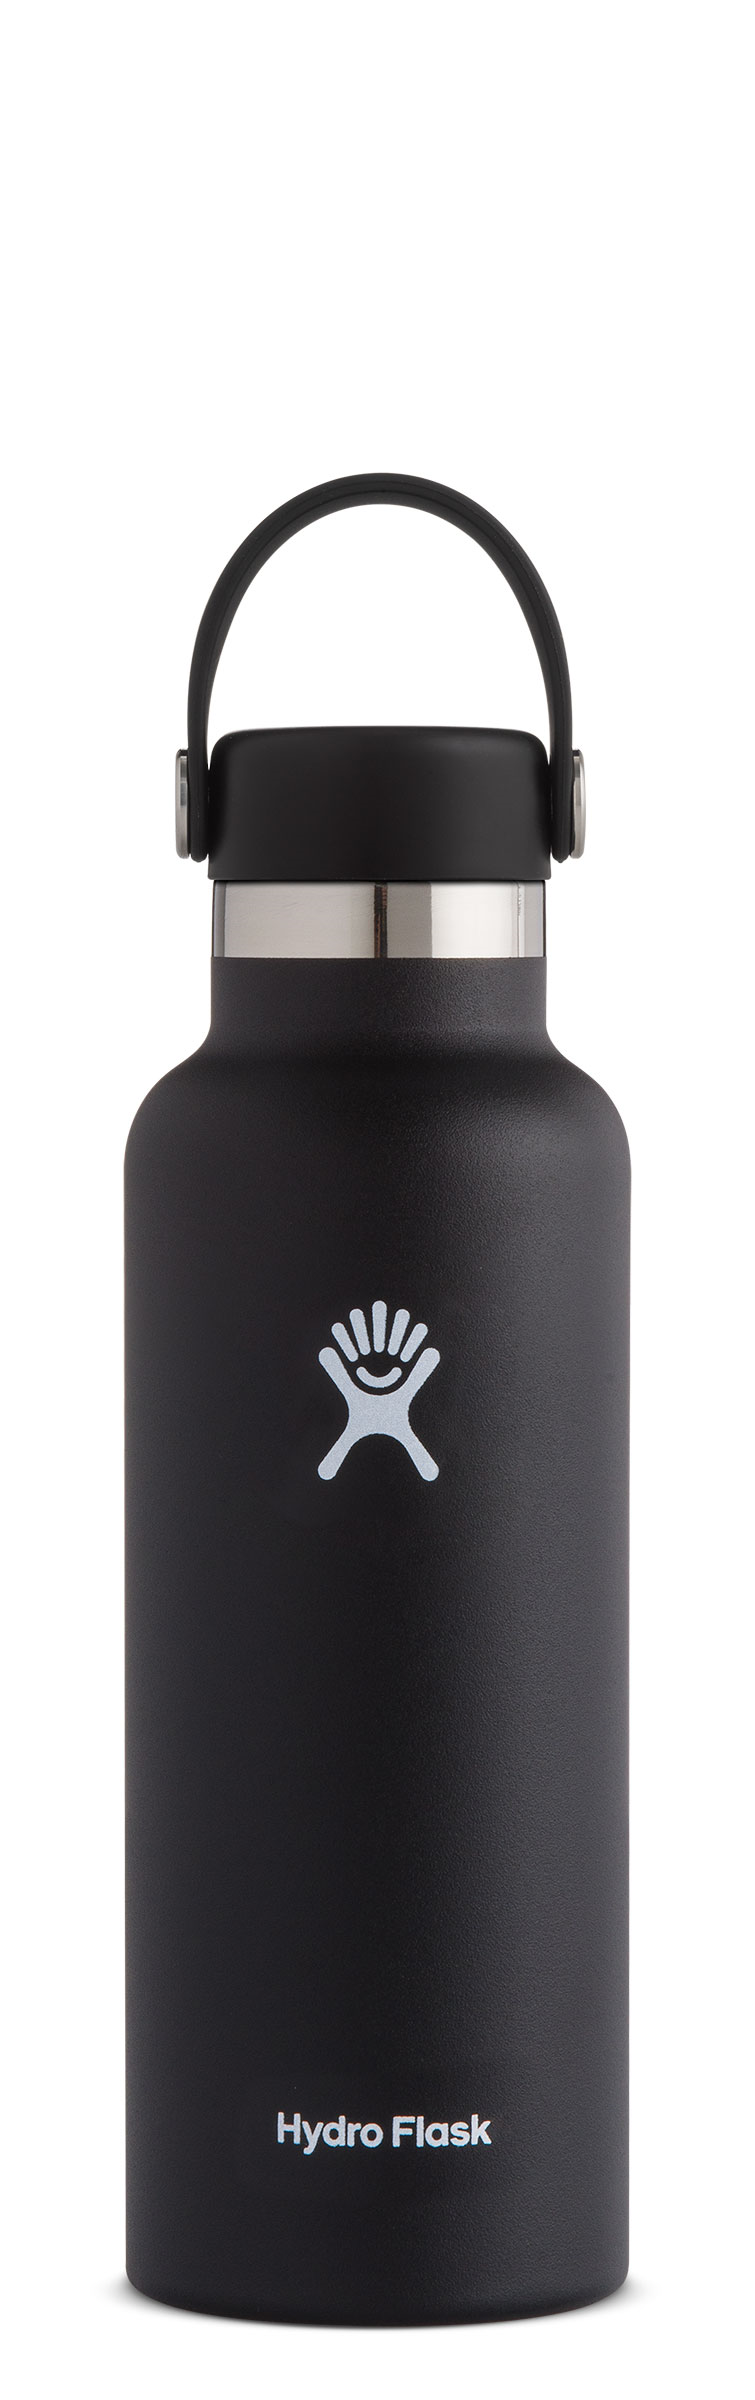 Hydro Flask 18 Oz Standard Mouth Stainless Steel Watermelon for sale online